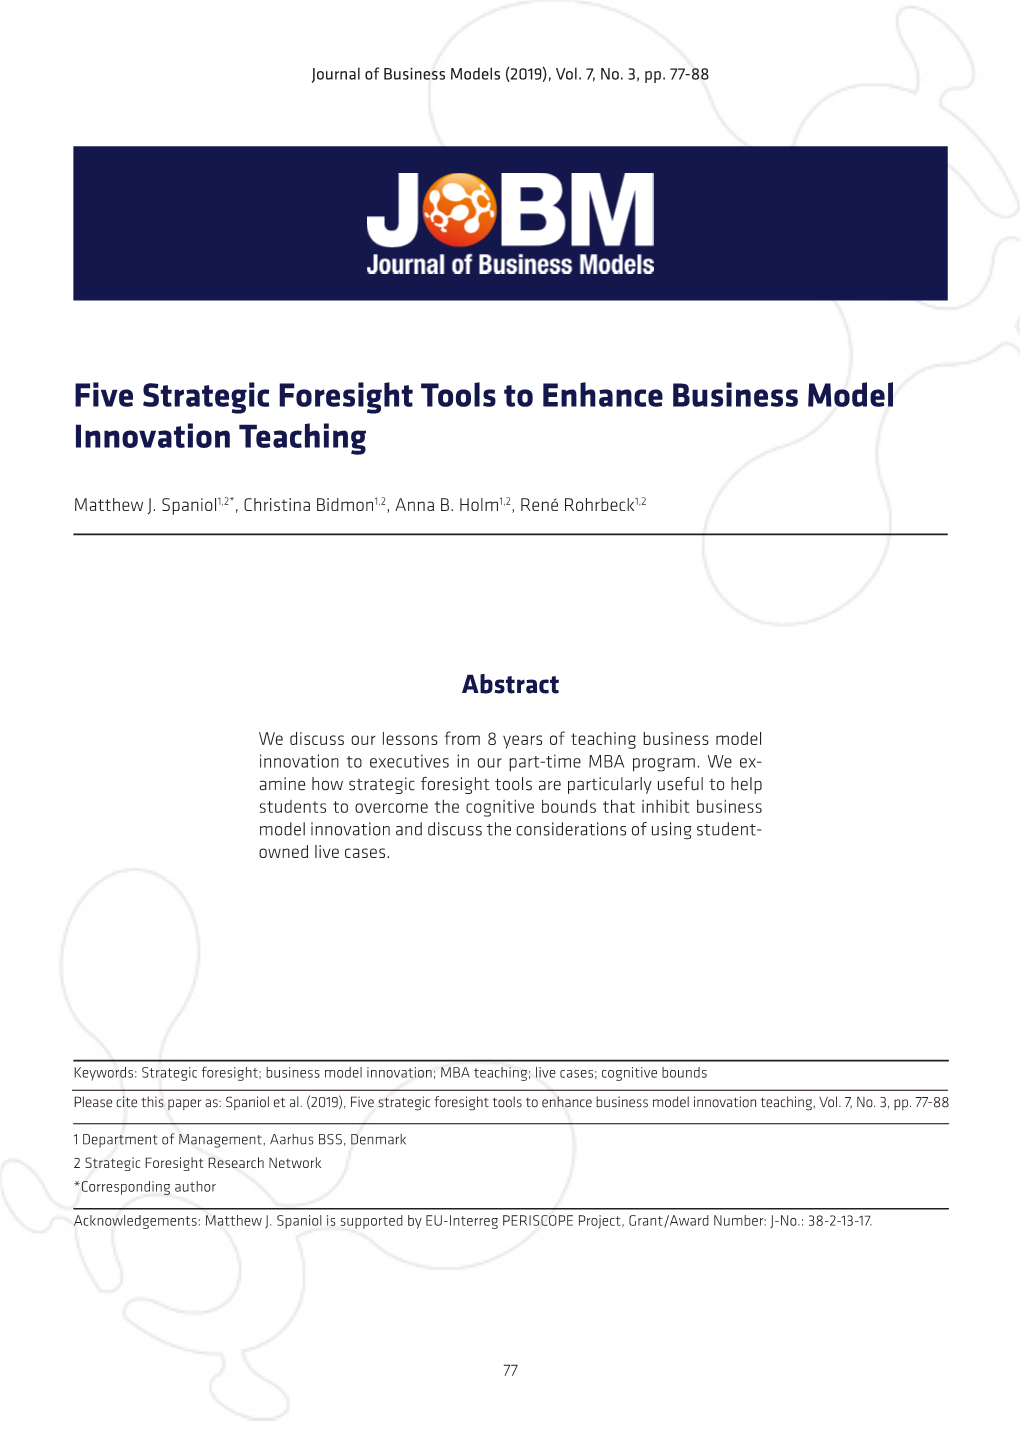 Five Strategic Foresight Tools to Enhance Business Model Innovation Teaching